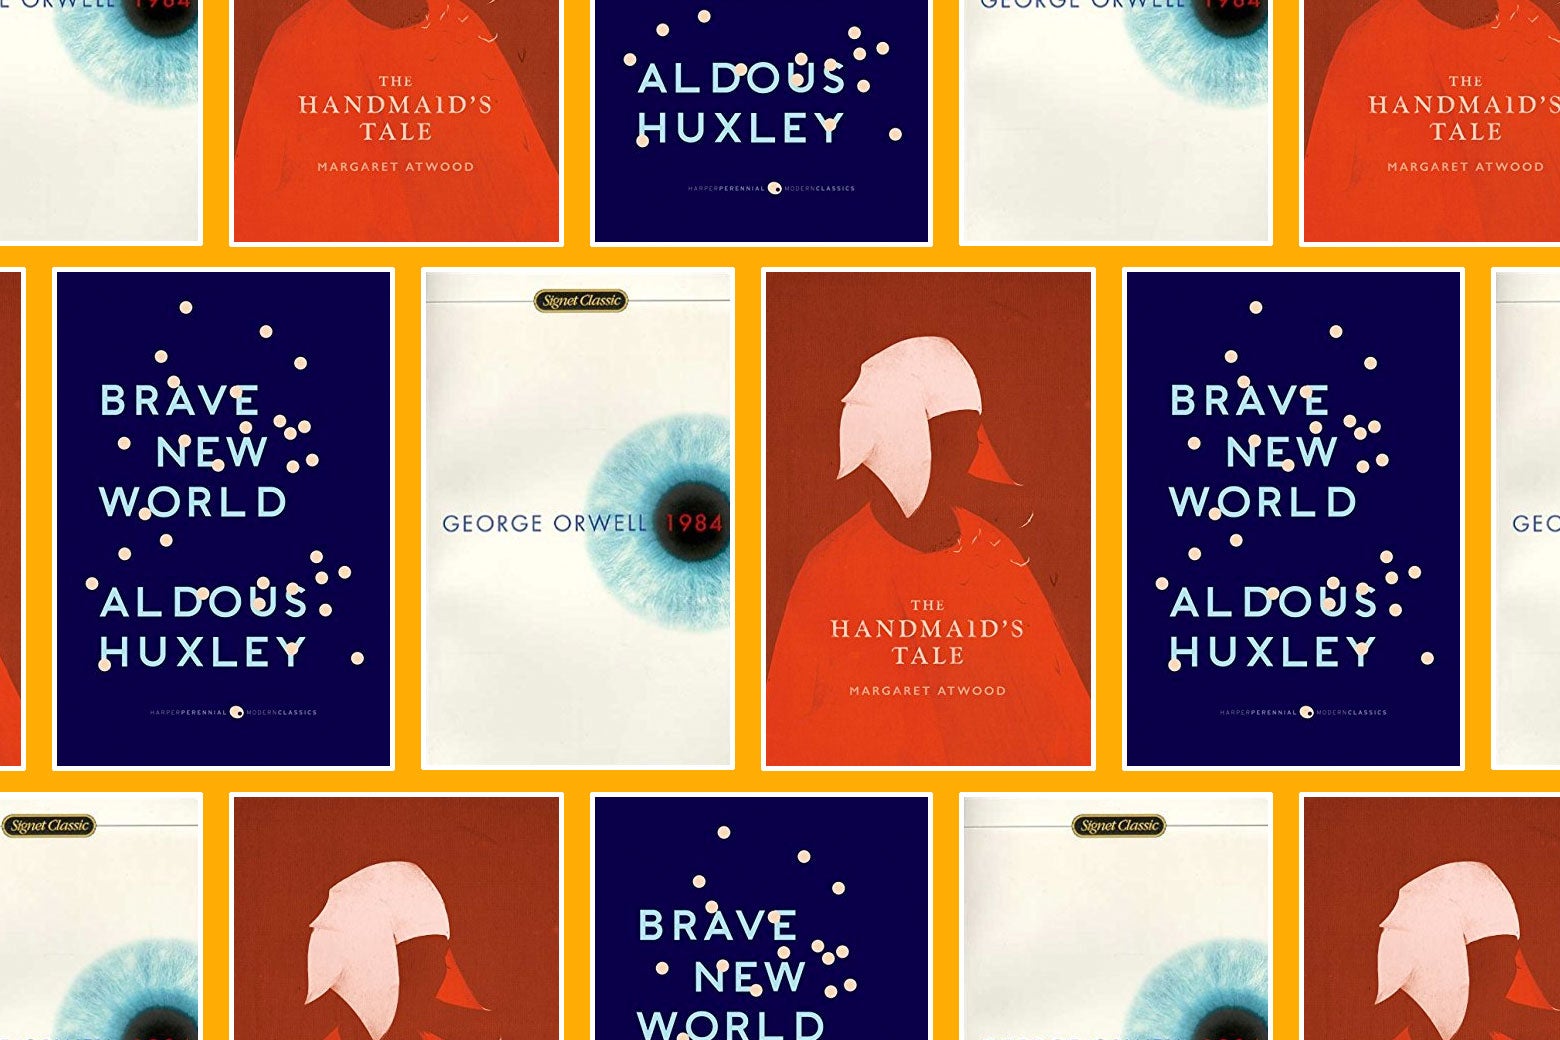 Collage of dystopian novels: 1984, The Handmaid’s Tale, and Brave New World.